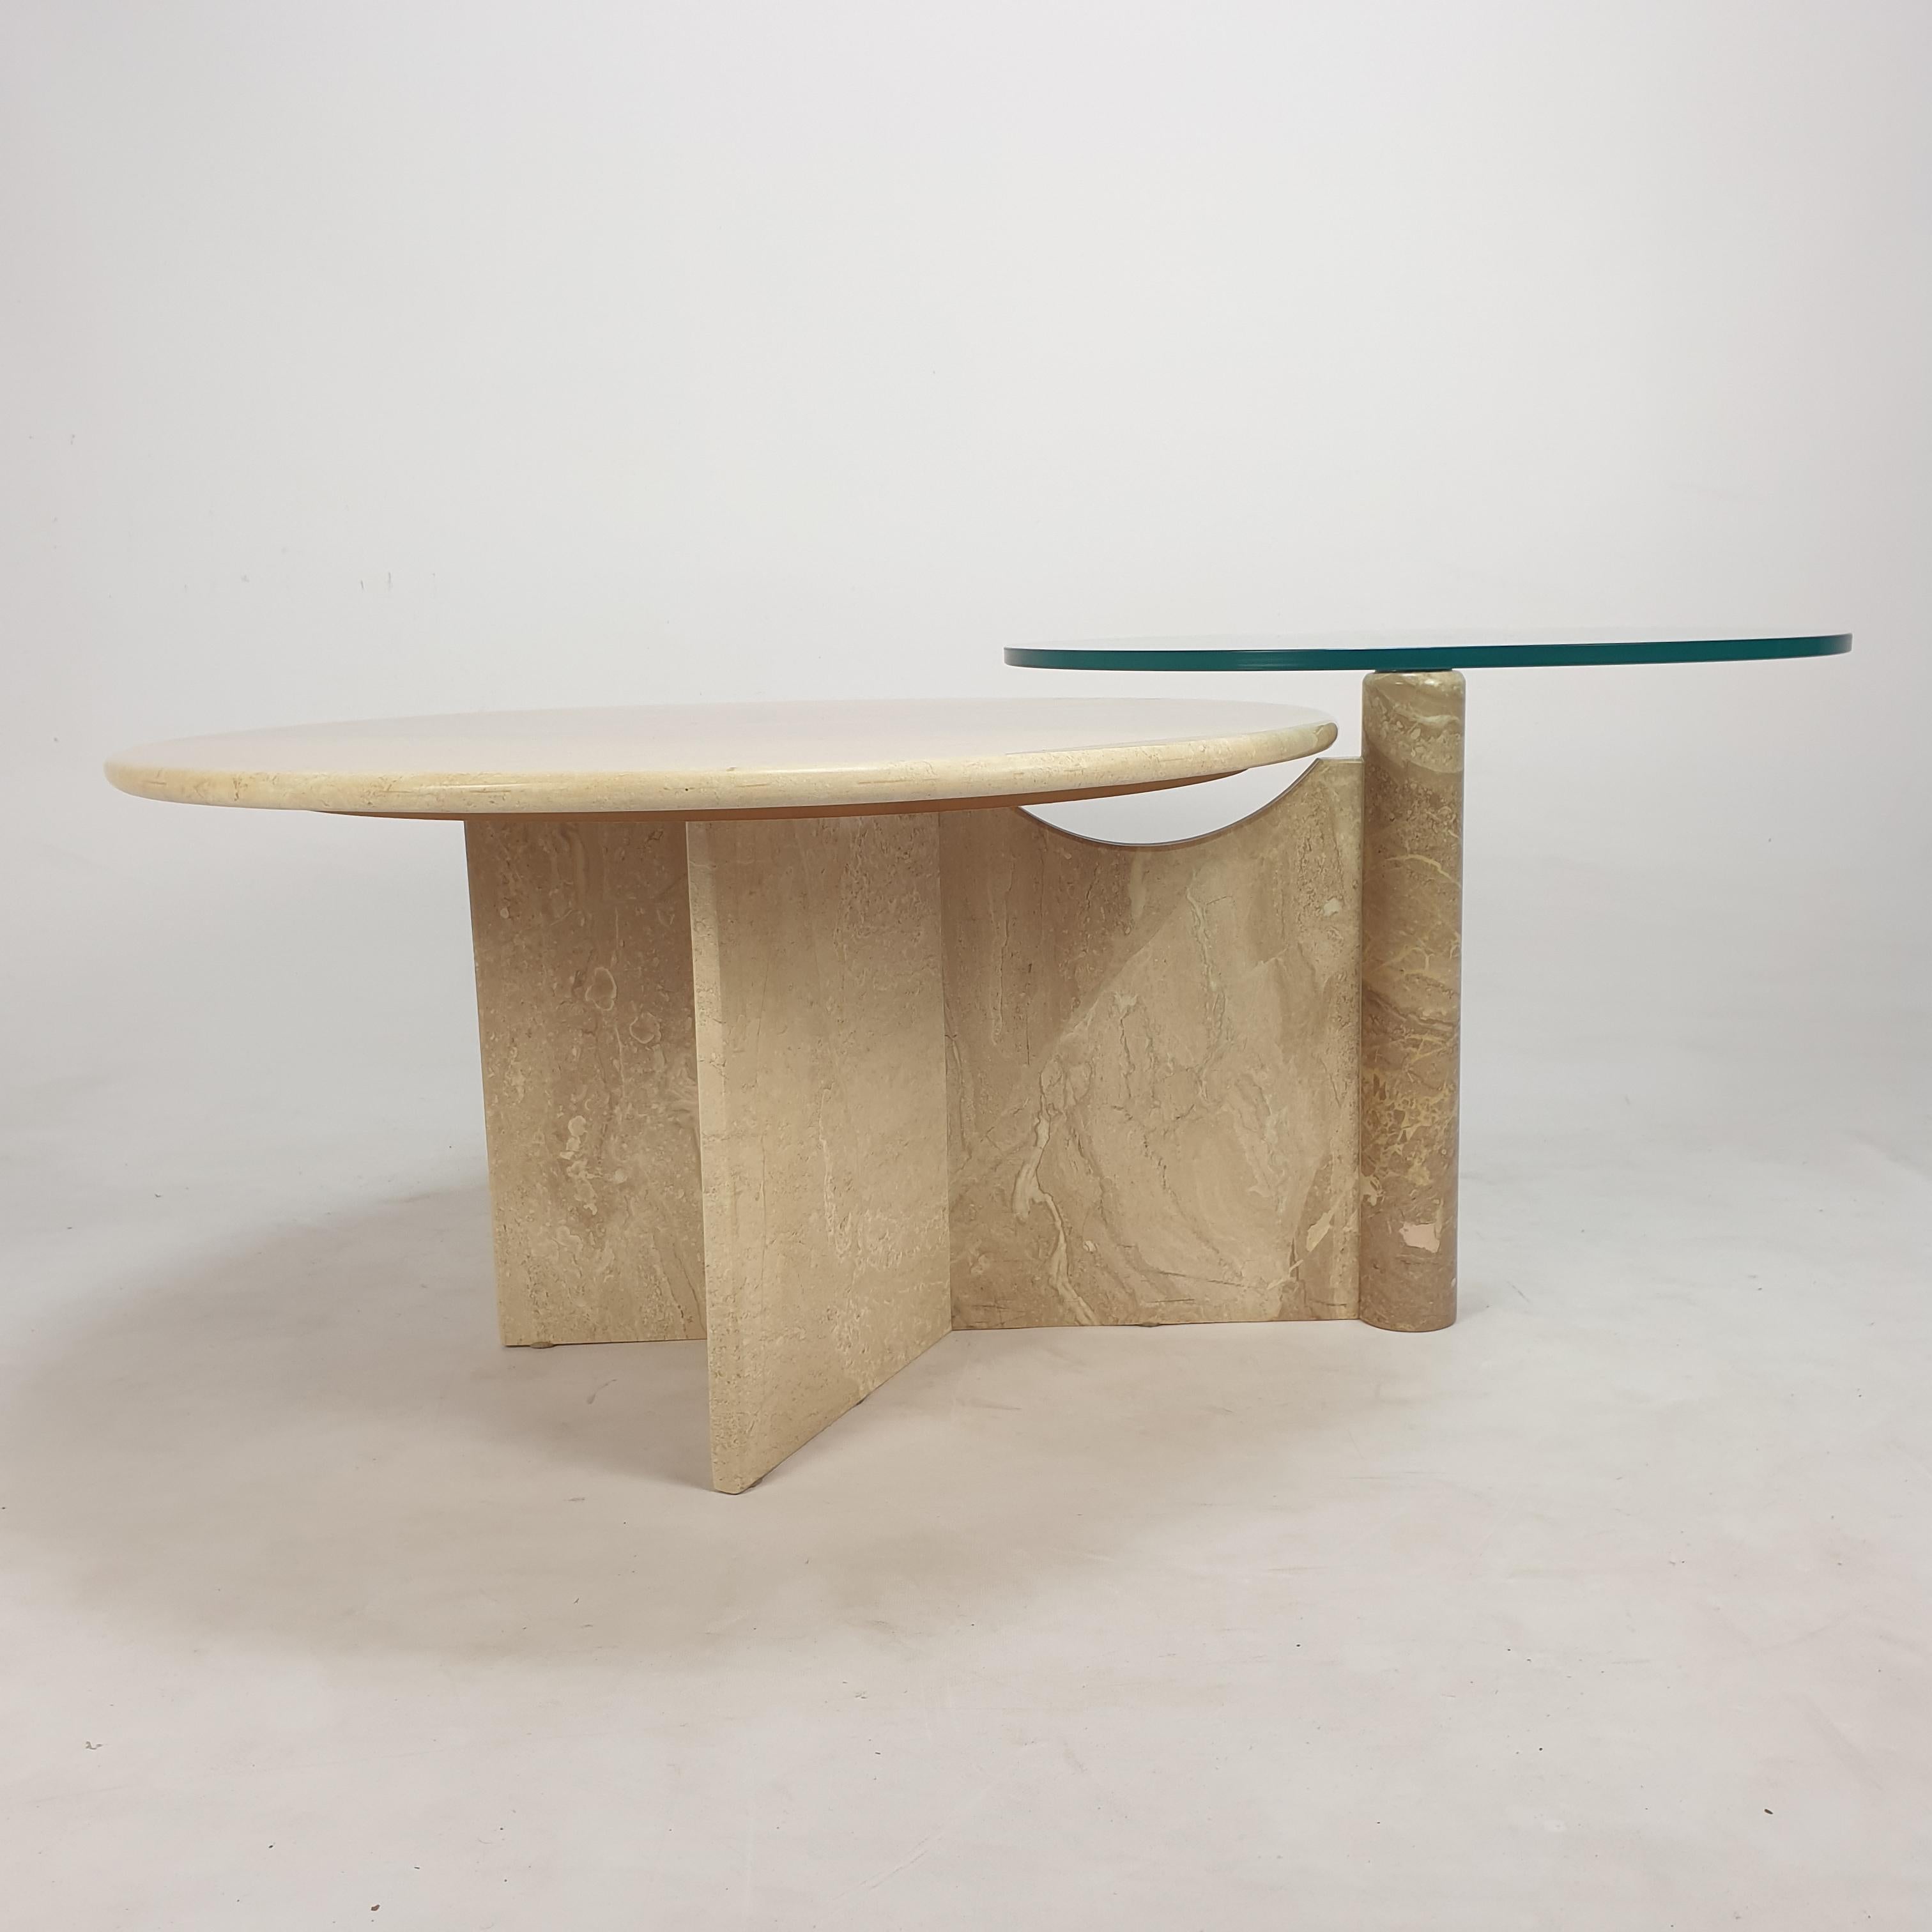 Italian Travertine and Glass Coffee Table, 1980s For Sale 5